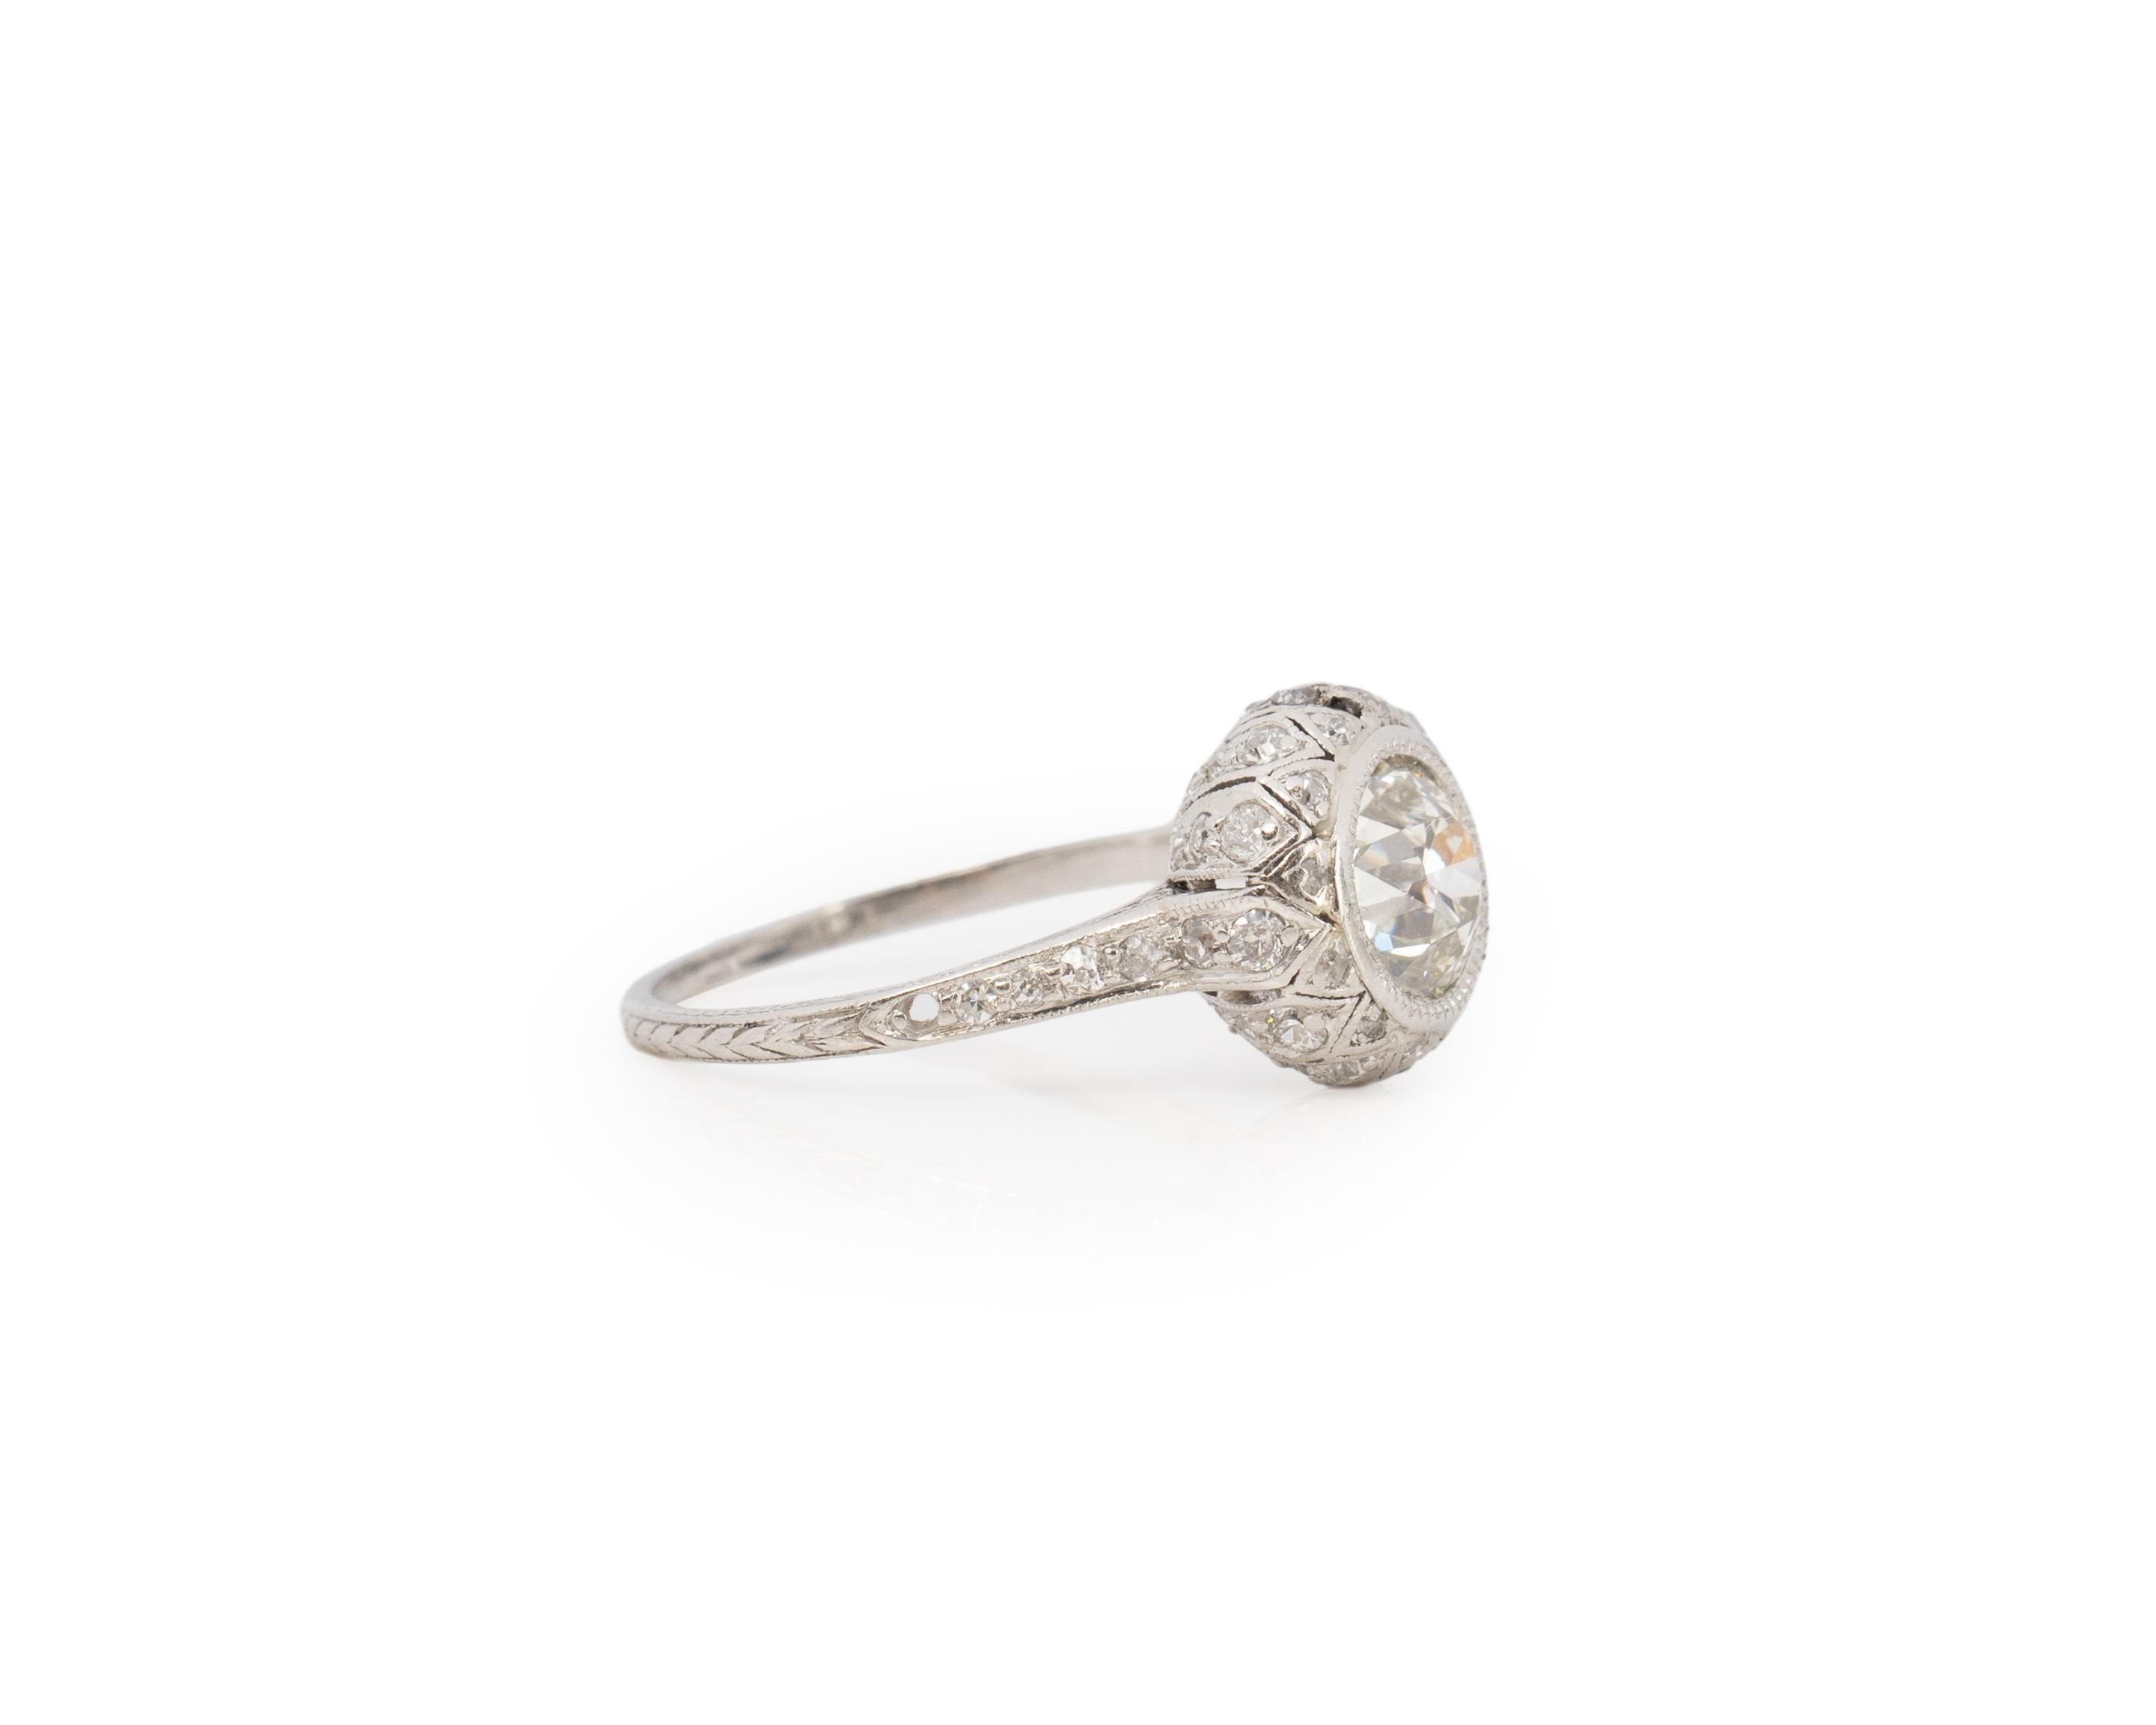 Ring Size: 7
Metal Type: Platinum [Hallmarked, and Tested]
Weight: 3.8 grams

Center Diamond Details:
GIA LAB REPORT #: 2221848985
Weight: 1.50ct
Cut: Old European brilliant
Color: K
Clarity: VS1
Measurements: 7.13mm x 7.28mm x 4.73mm

Side Diamond